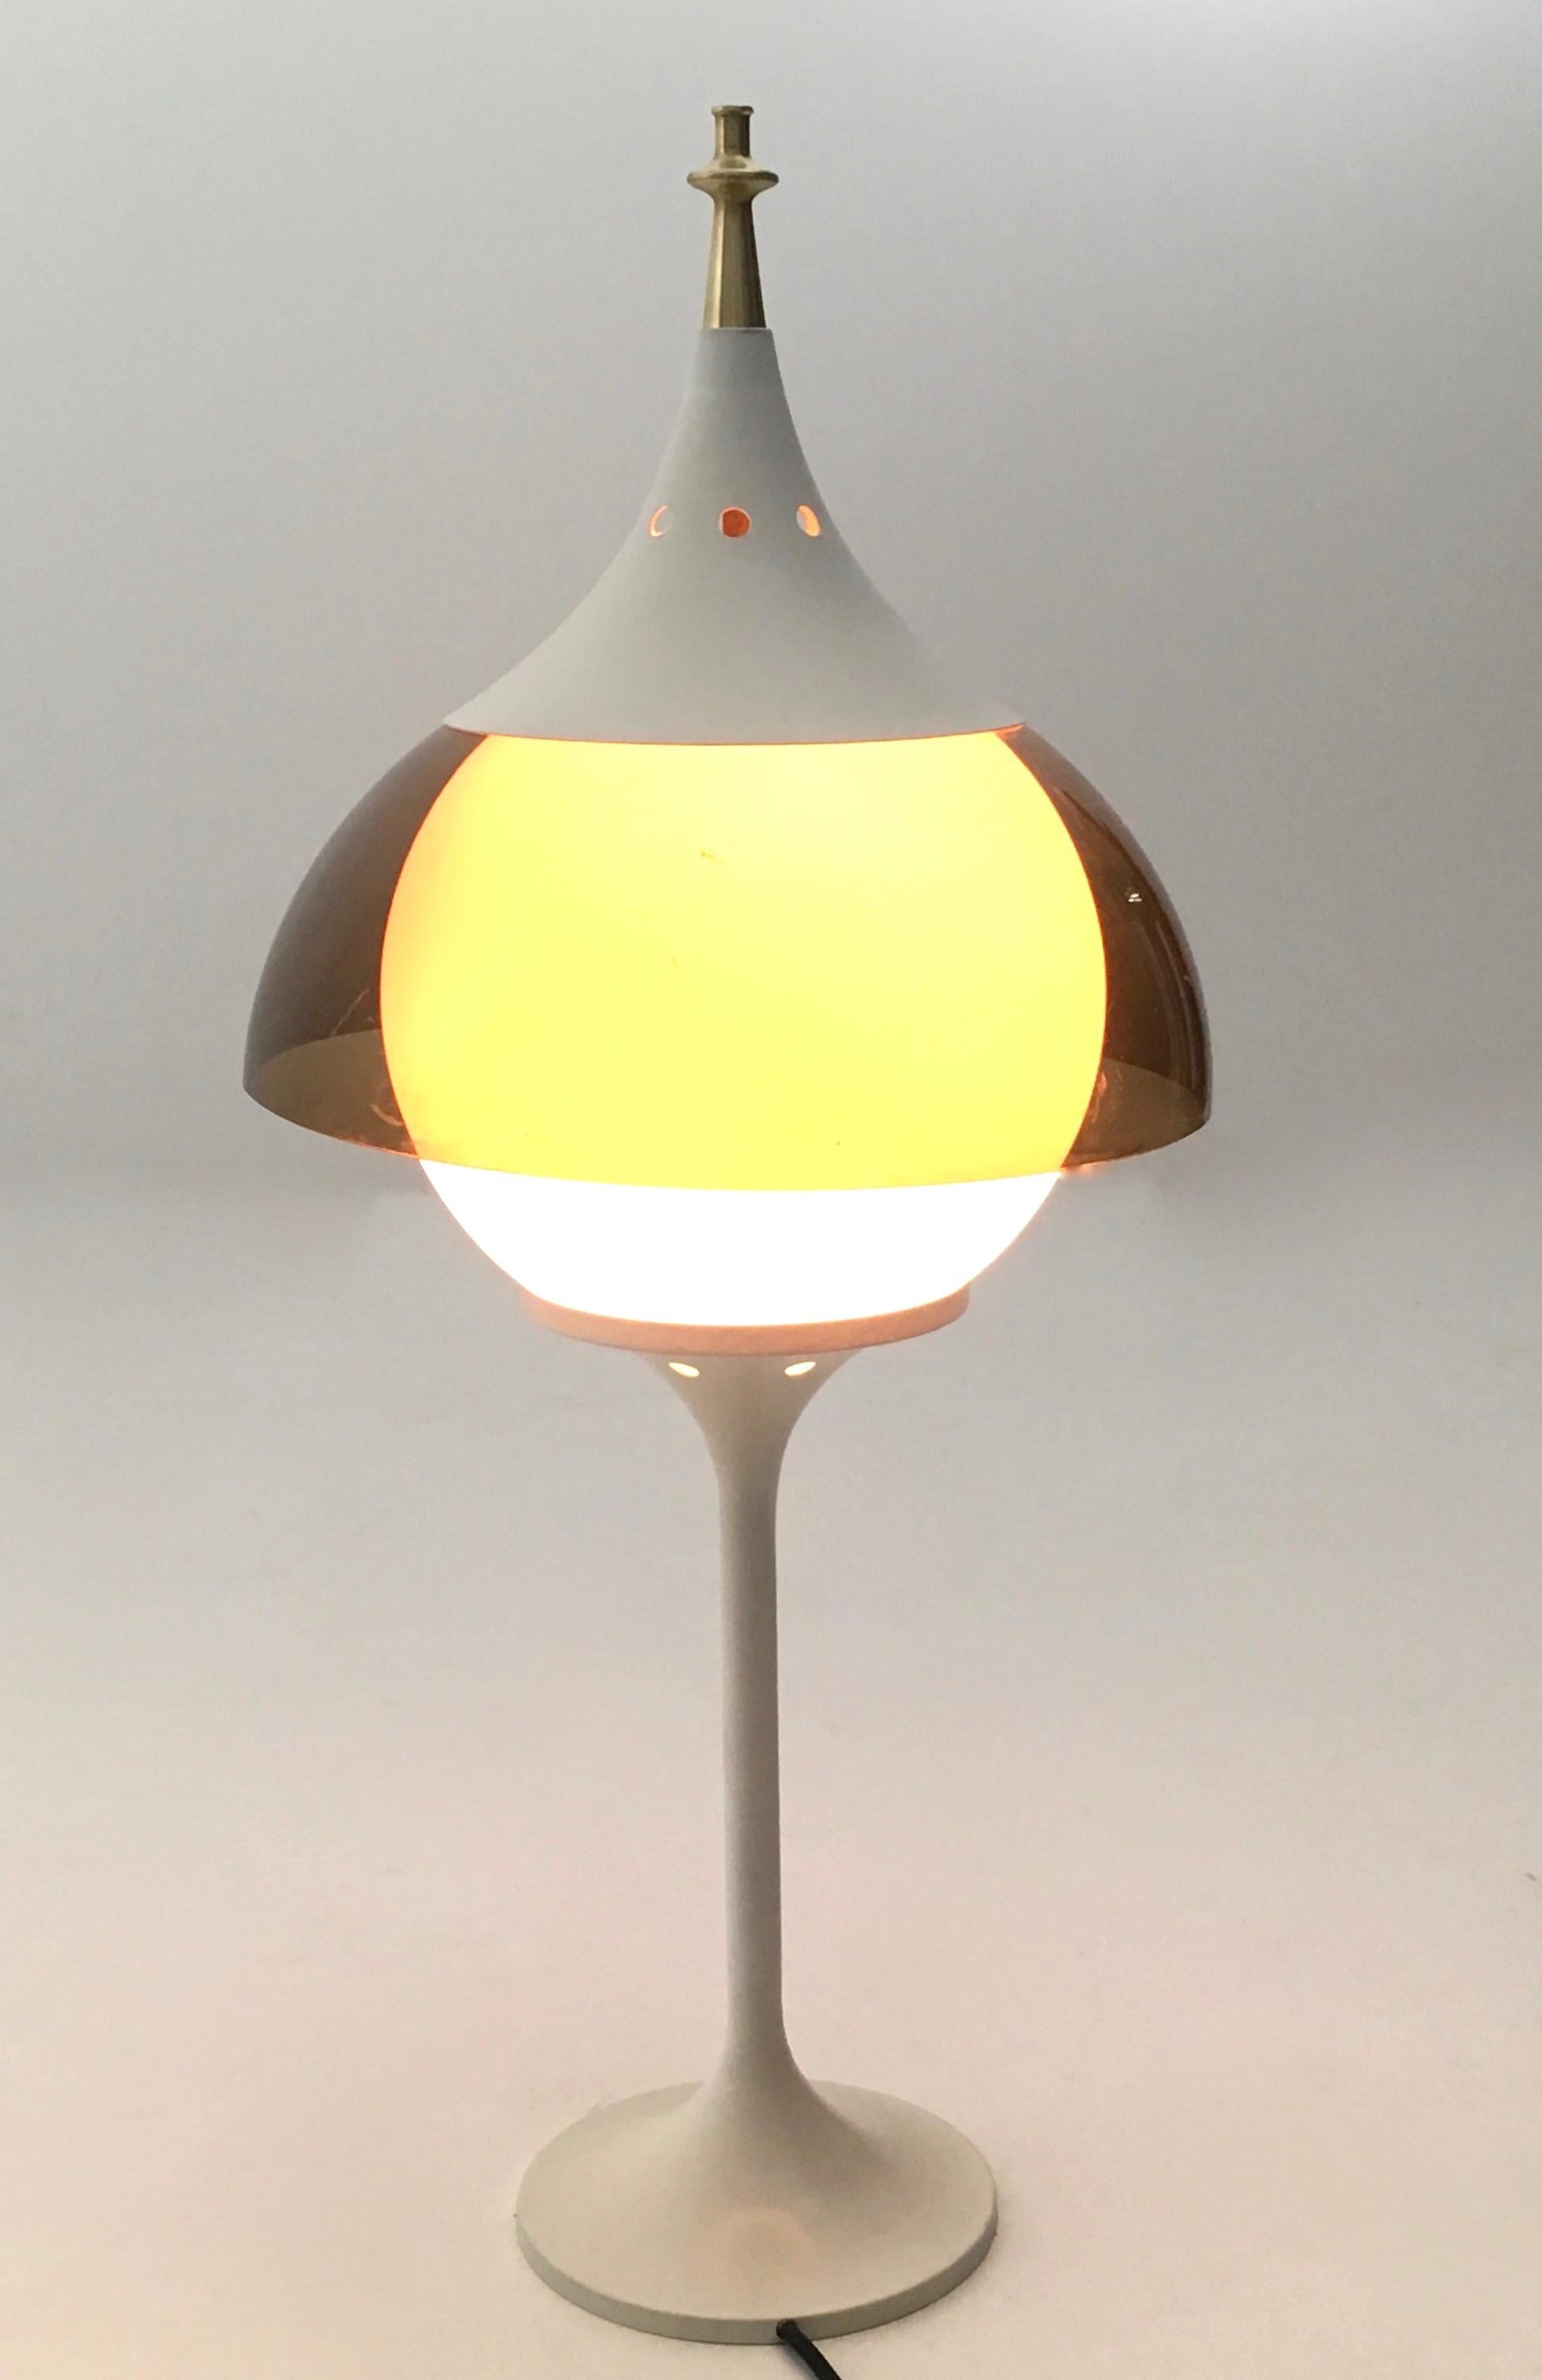 Made in Italy 1970s.
It is made in white varnished metal, opaline glass, plexiglass and turned brass. 
This table lamp might show slight traces of use since it's vintage, but it can be considered as in very good original condition and ready to give